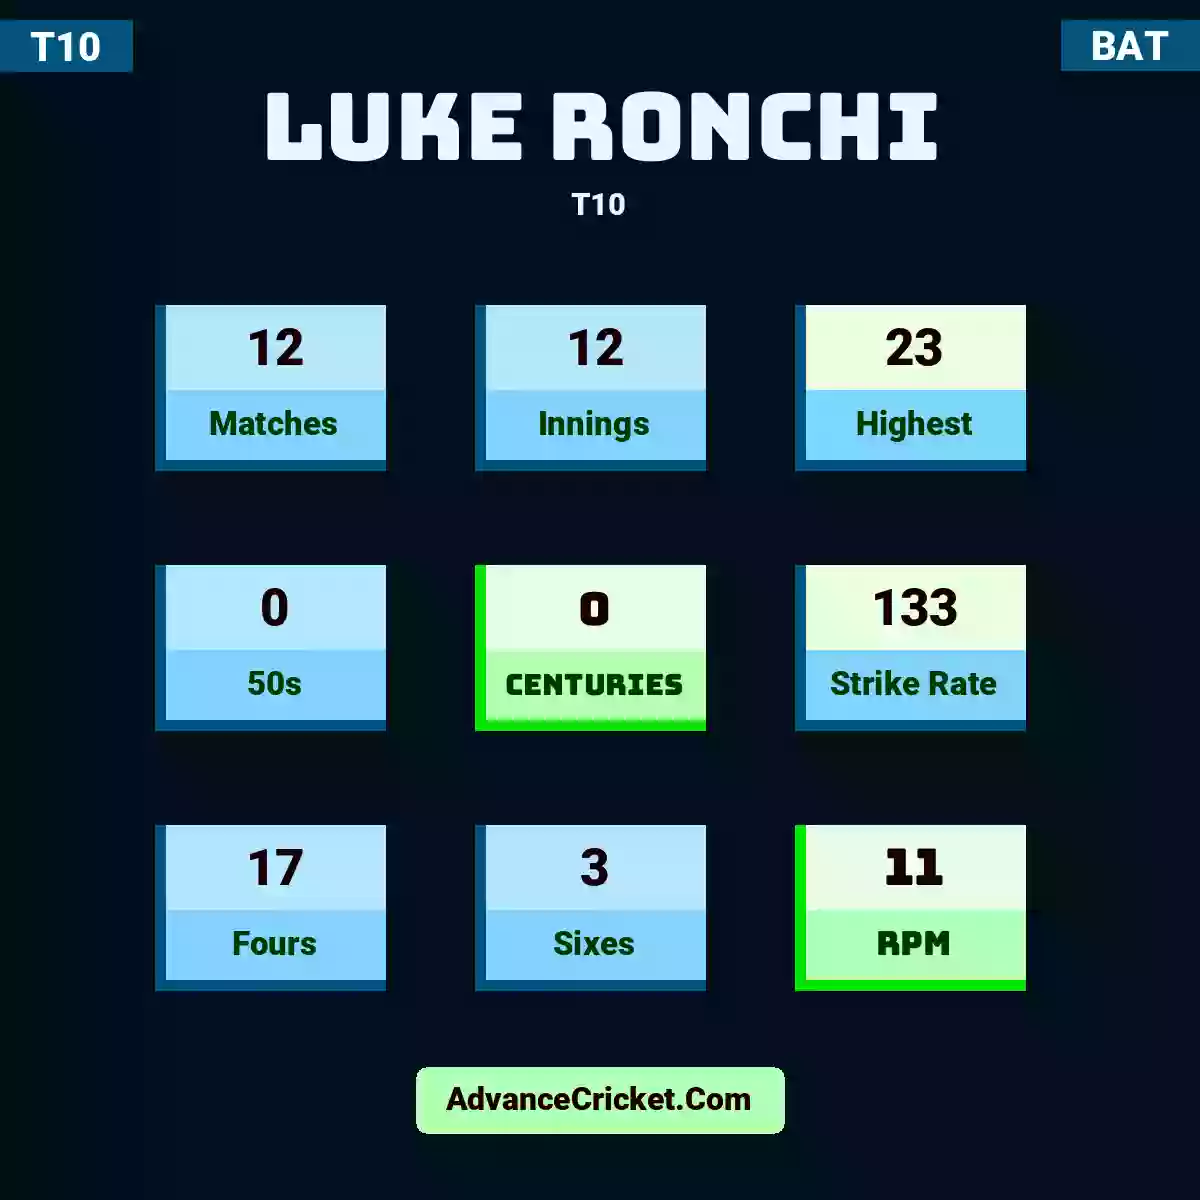 Luke Ronchi T10 , Luke Ronchi played 12 matches, scored 23 runs as highest, 0 half-centuries, and 0 centuries, with a strike rate of 133. L.Ronchi hit 17 fours and 3 sixes, with an RPM of 11.